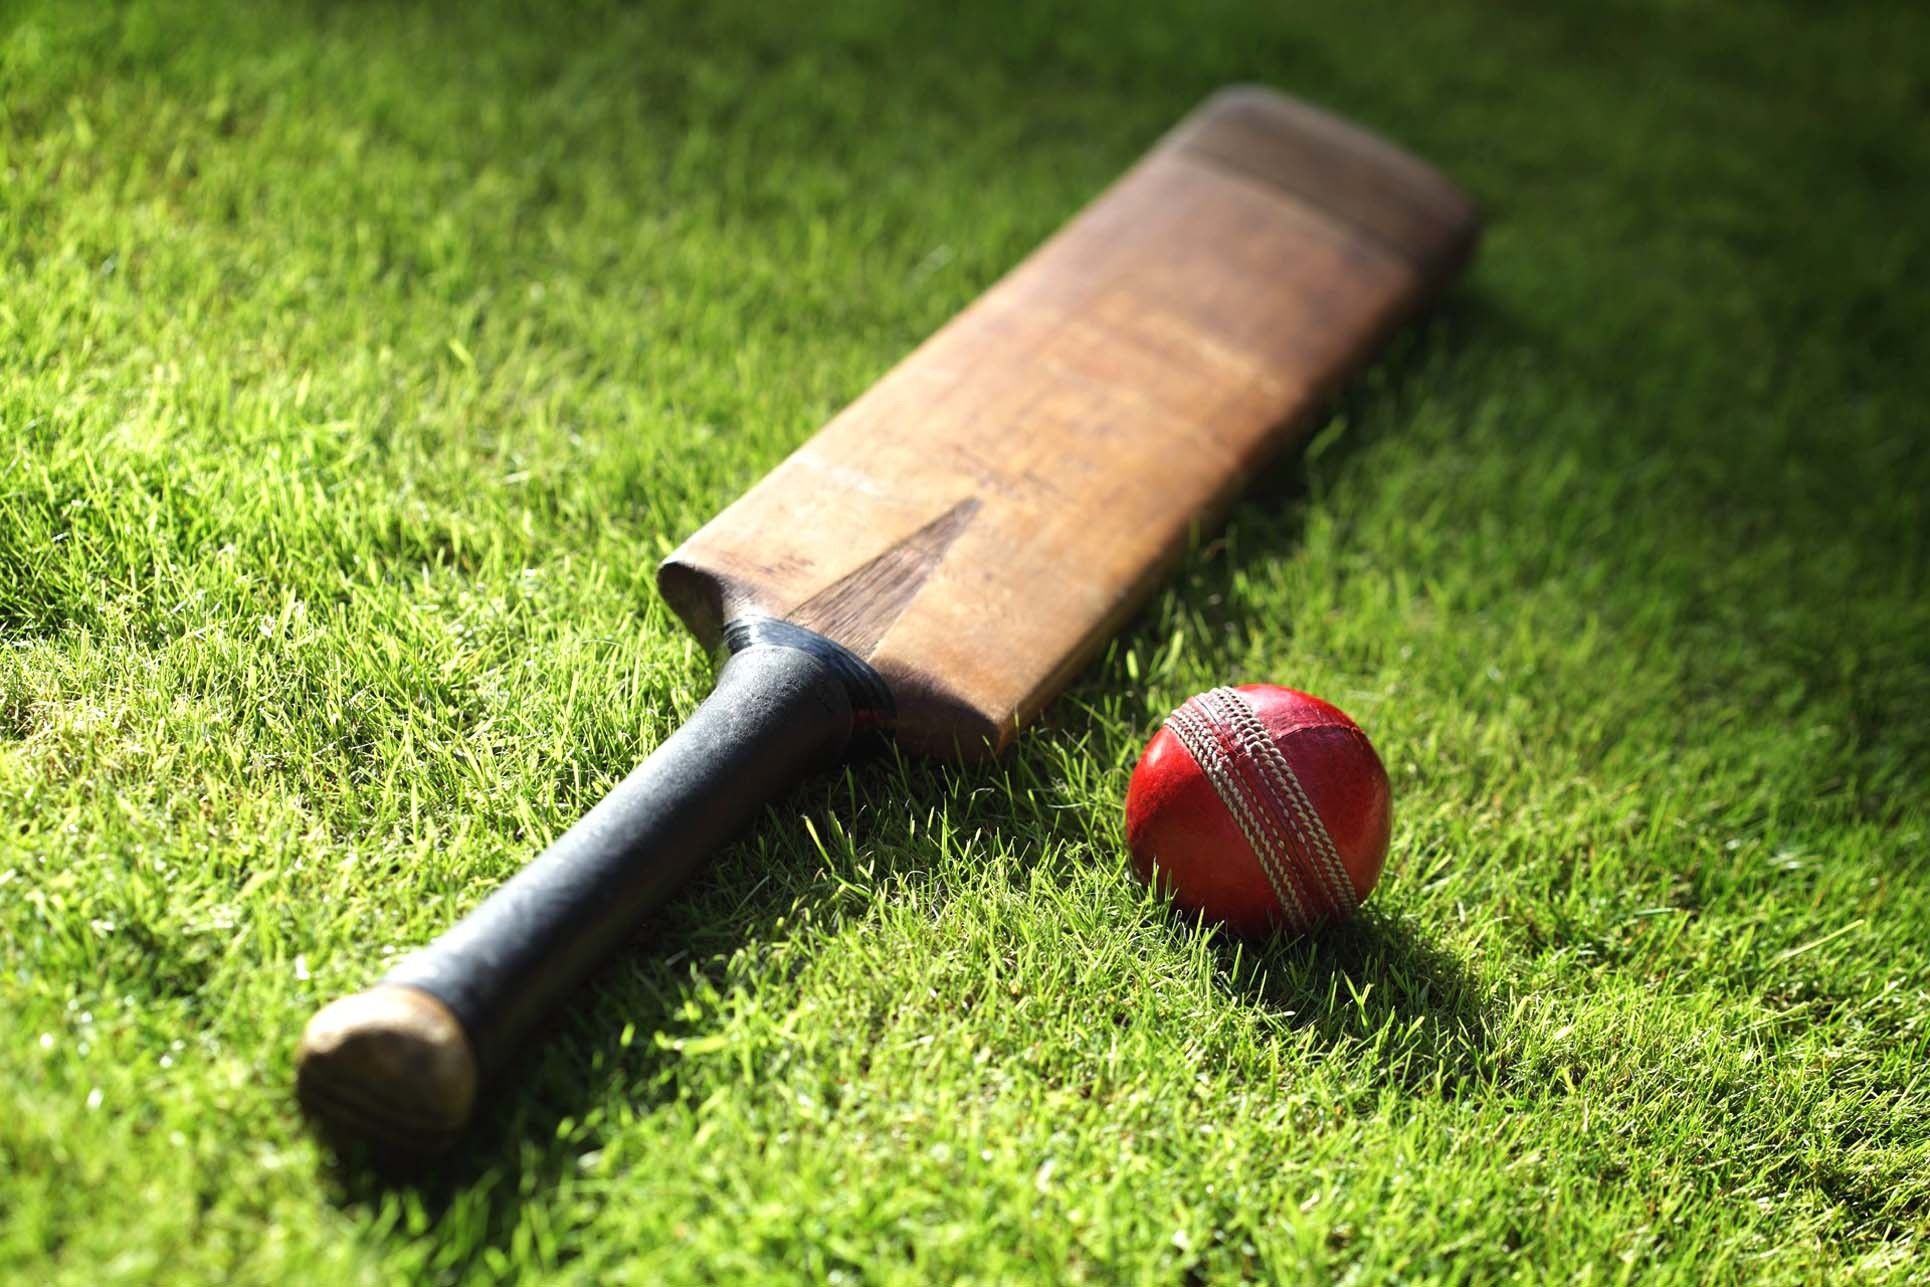 Successfully playing an online cricket betting game app can earn you real money.